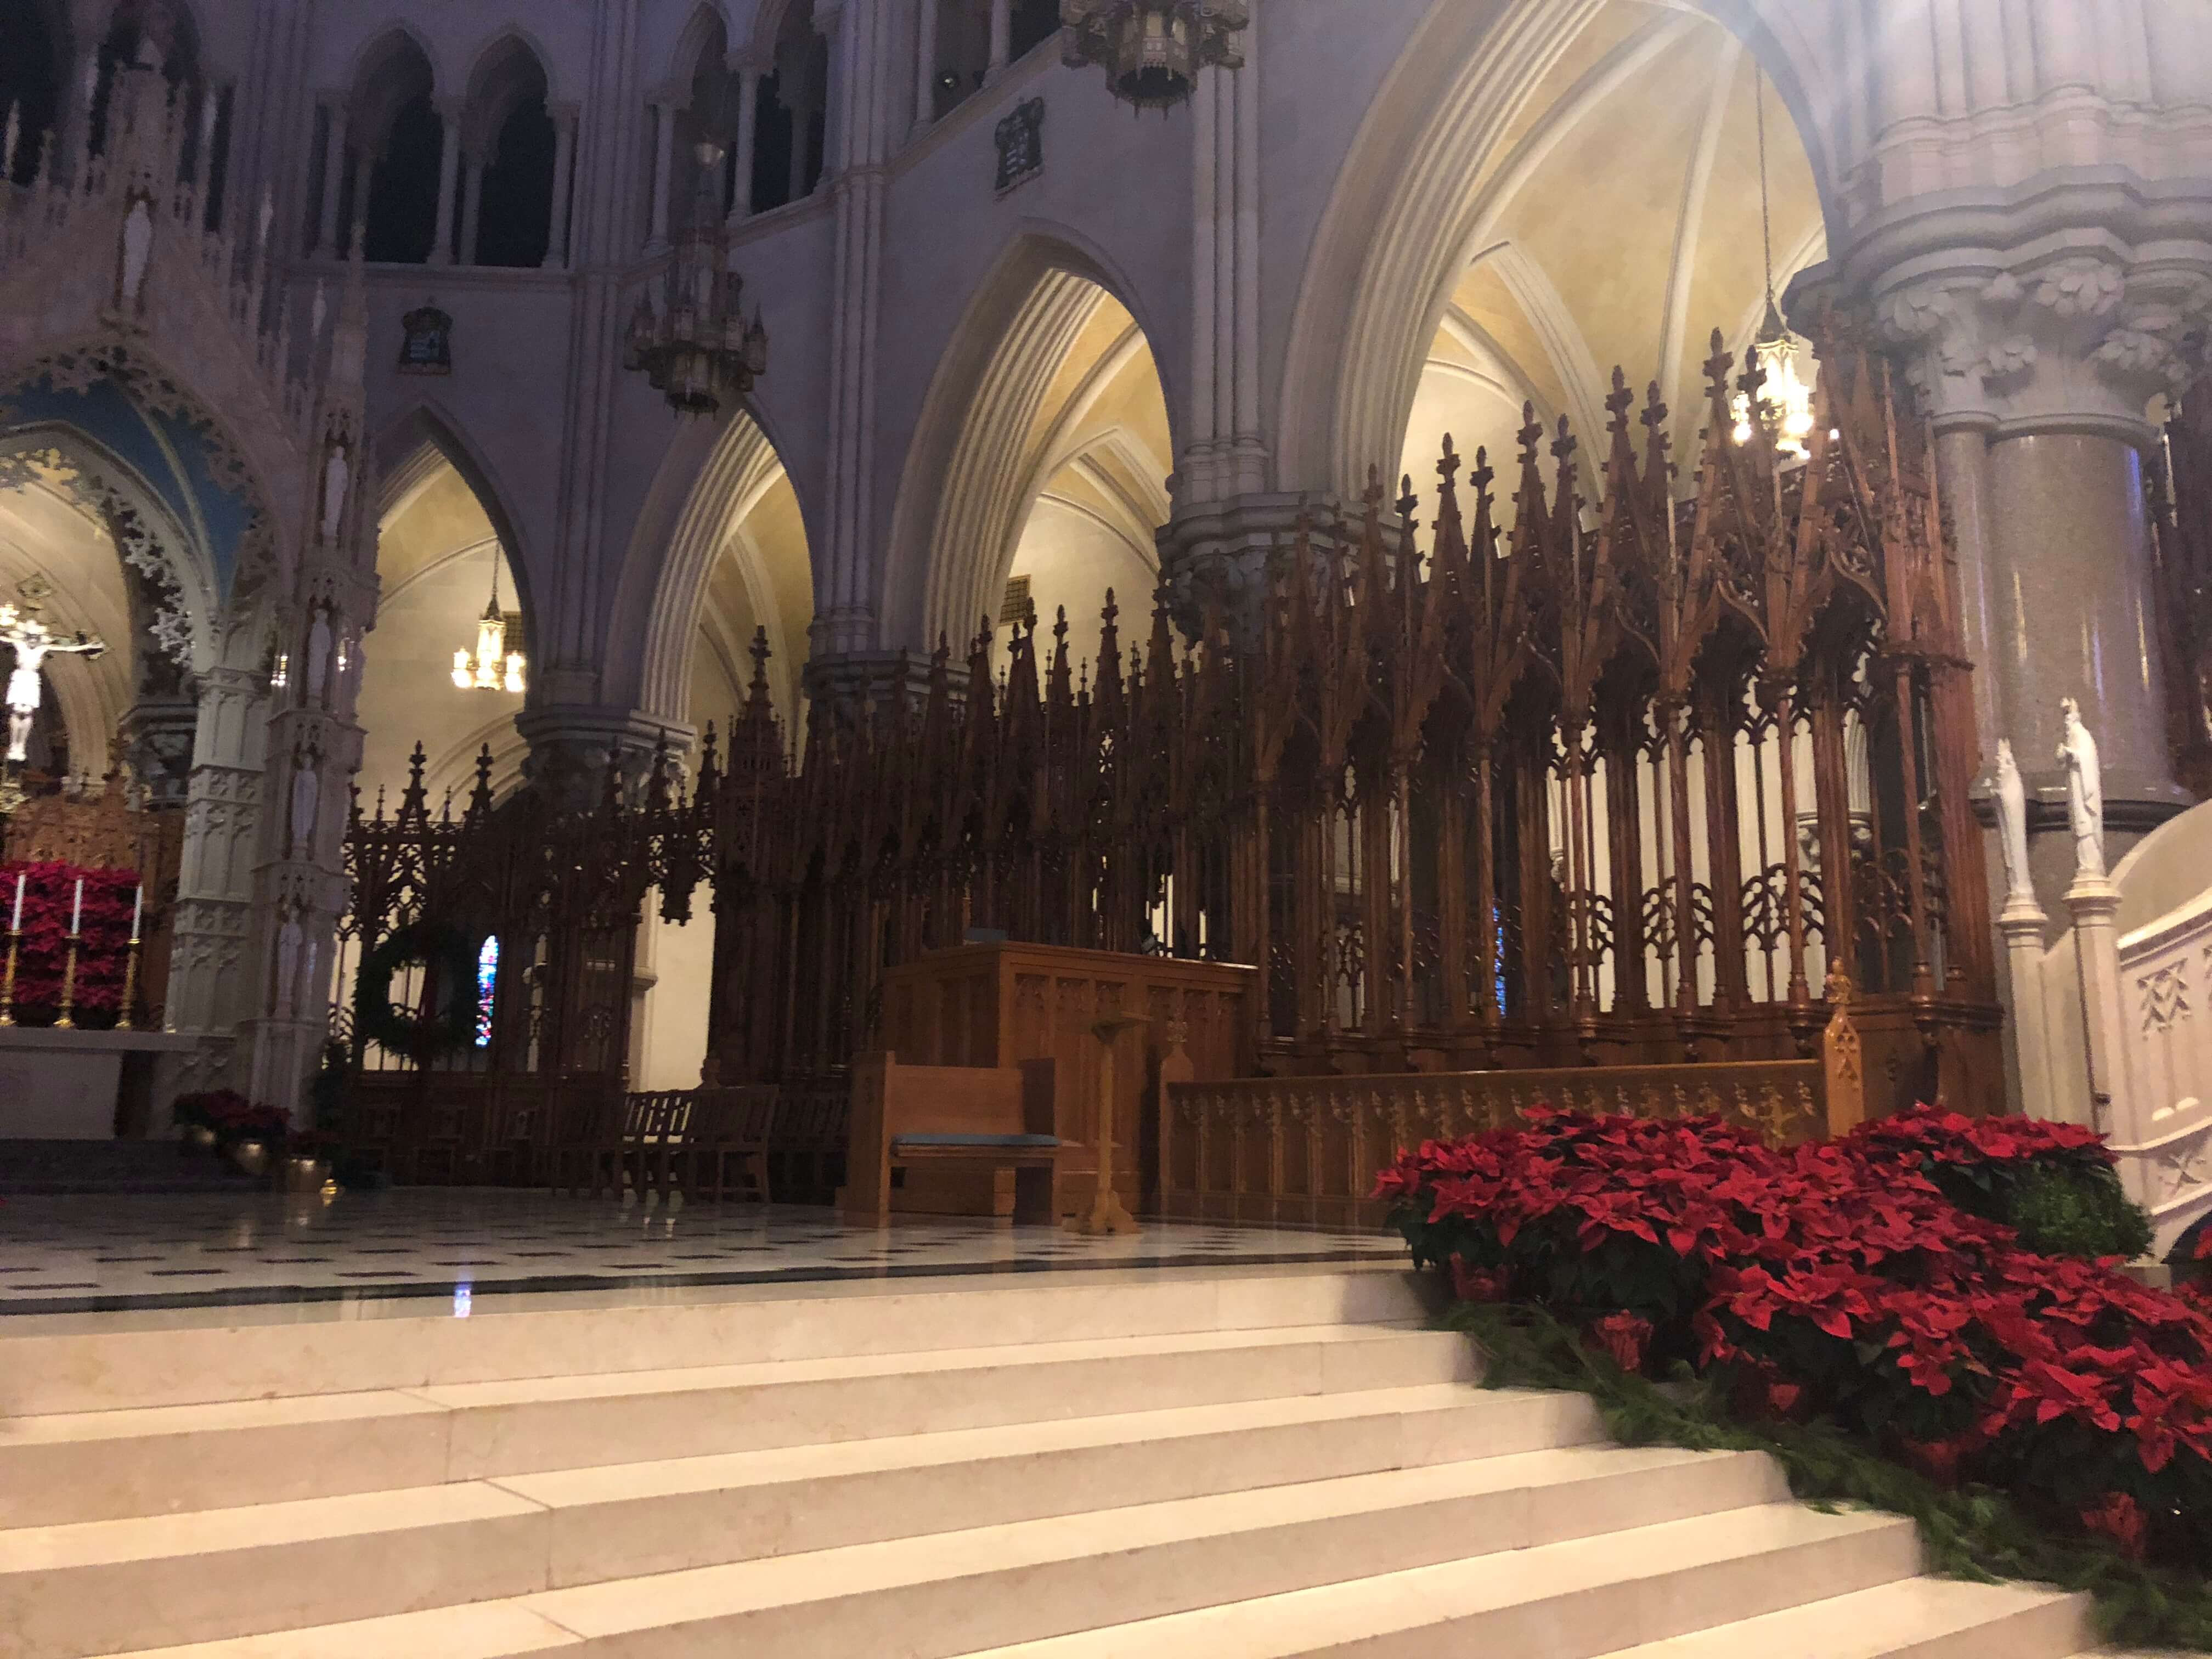 Choir stalls - Cathedral Basilica of the Sacred Heart, Newark, New Jersey